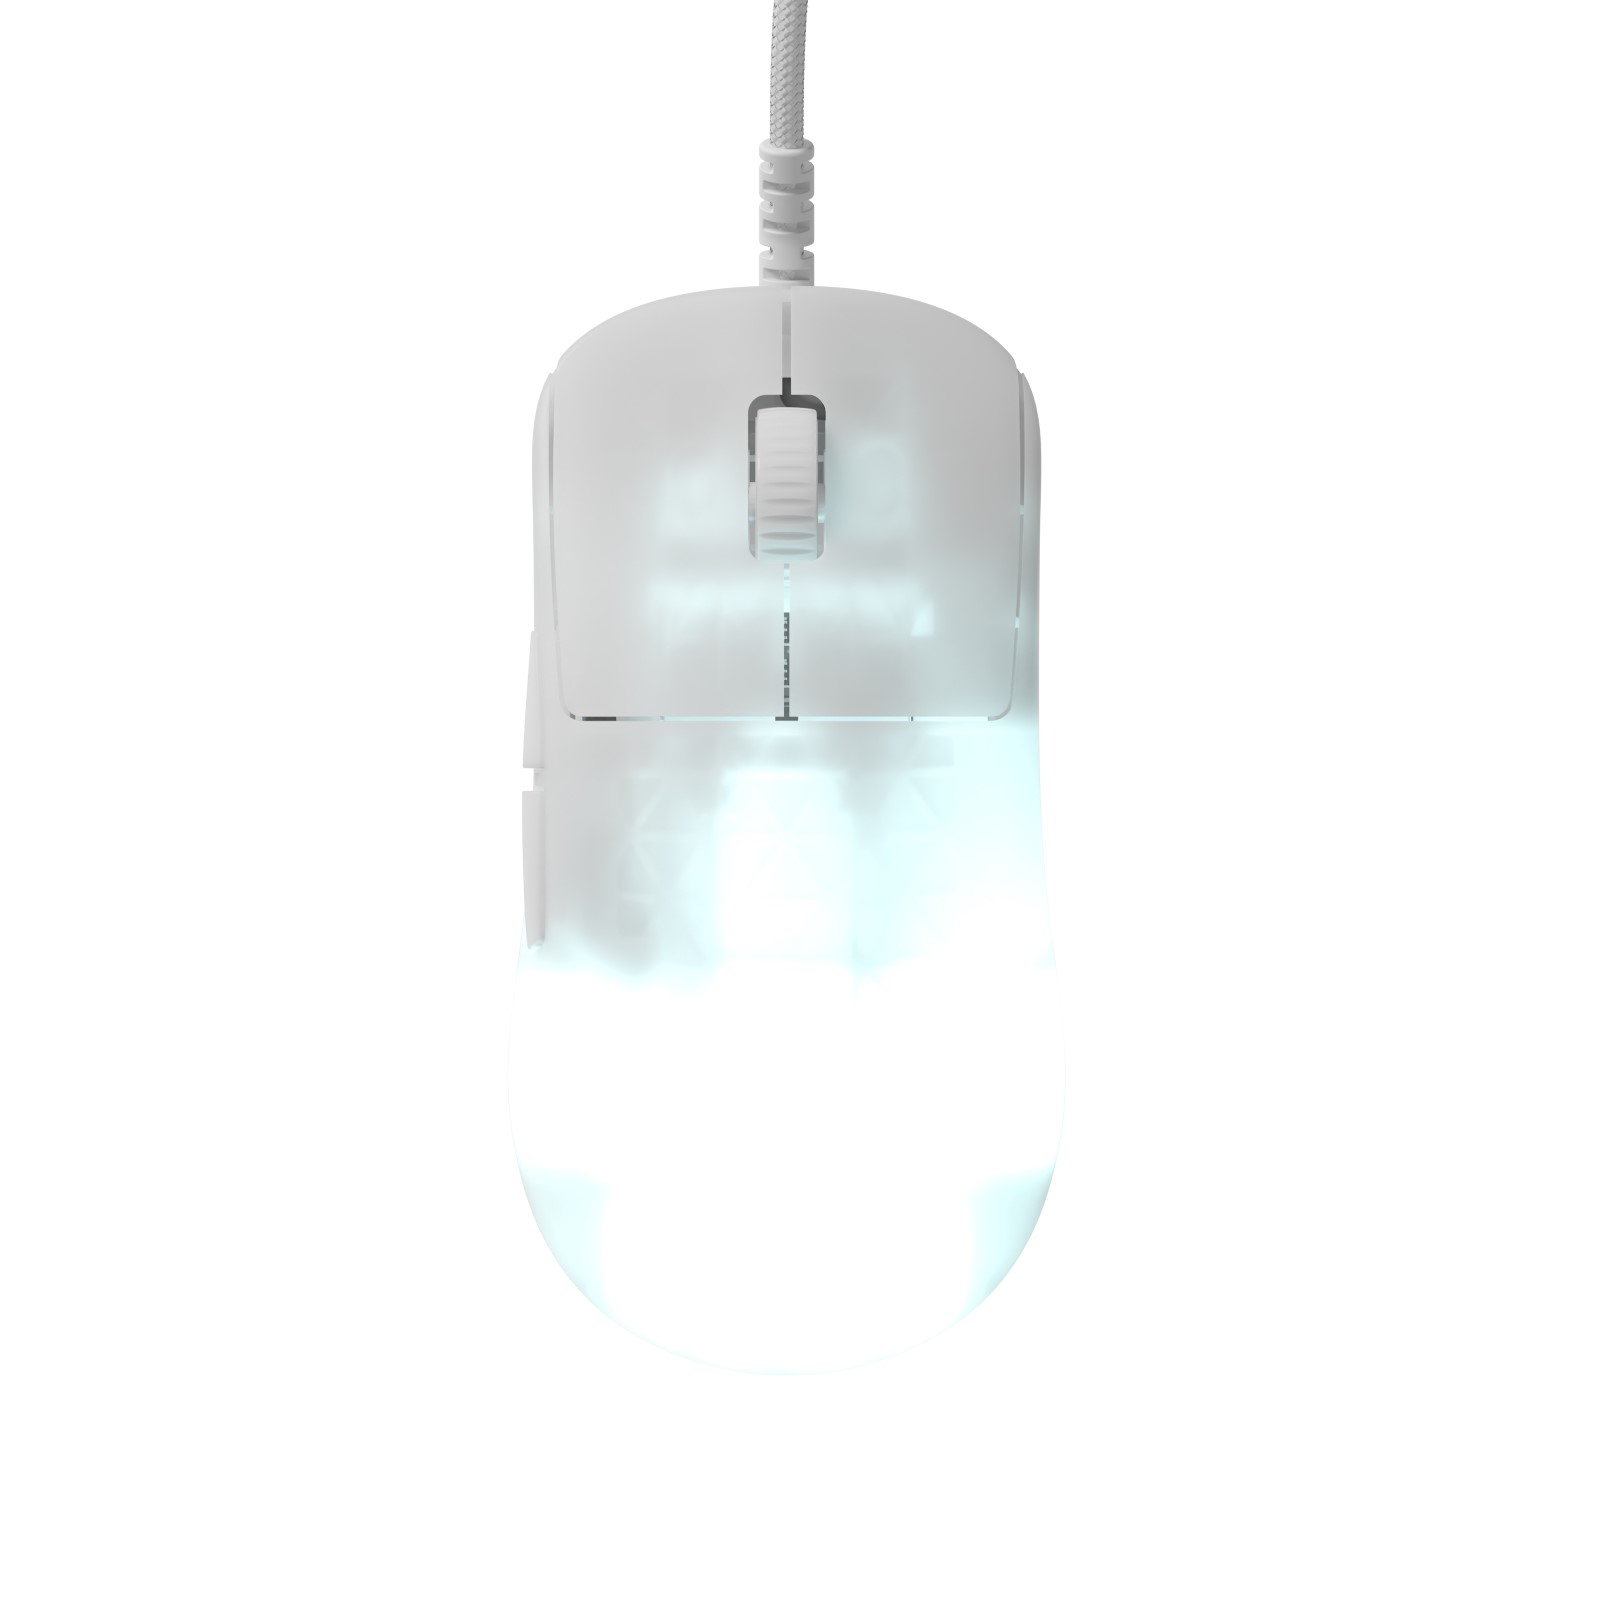 Endgame Gear OP1 RGB Gaming Mouse White Frost